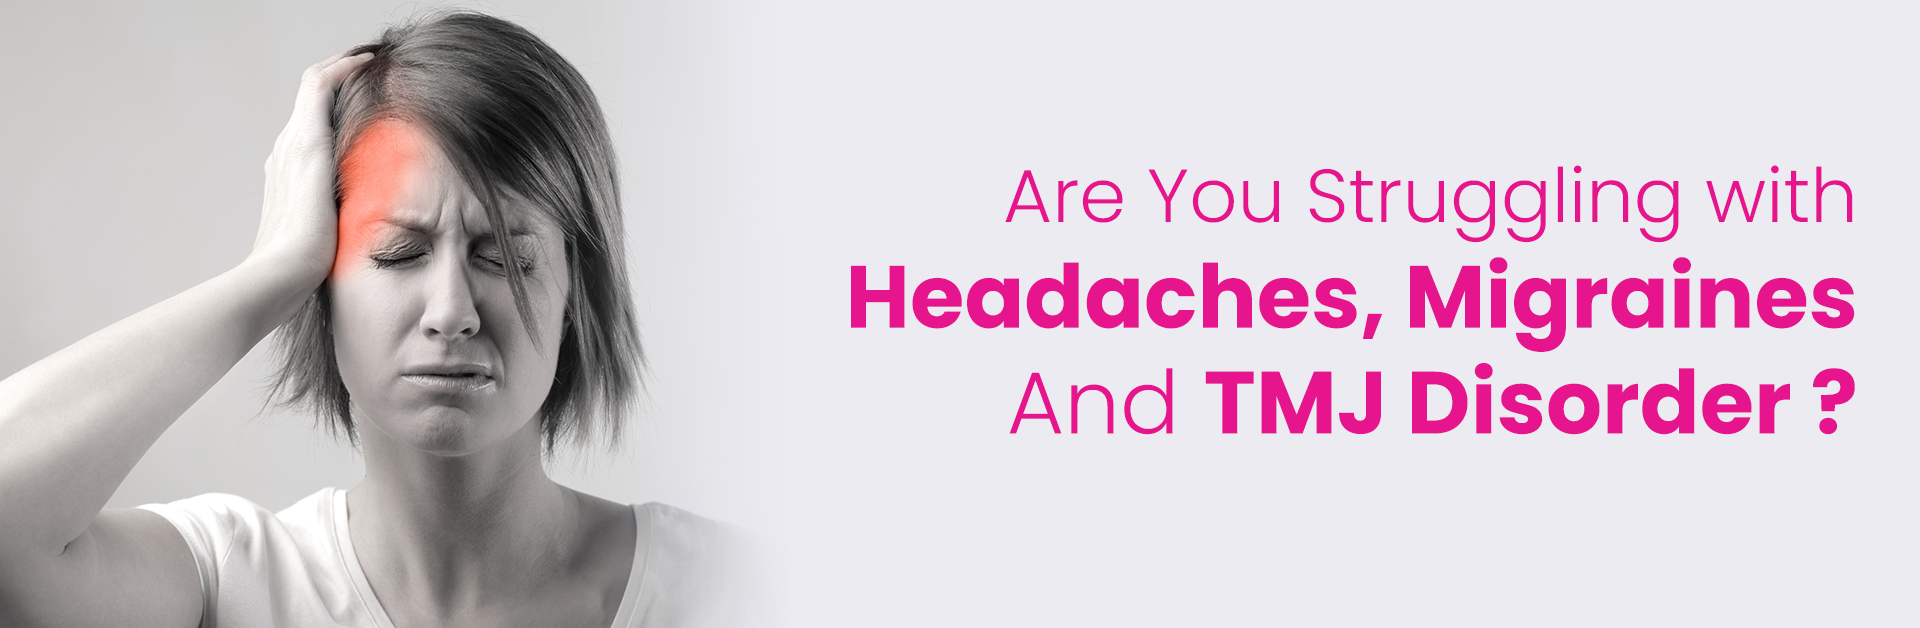 ARE YOU STRUGGLING WITH HEADACHES, MIGRAINES AND TMJ DISORDER?